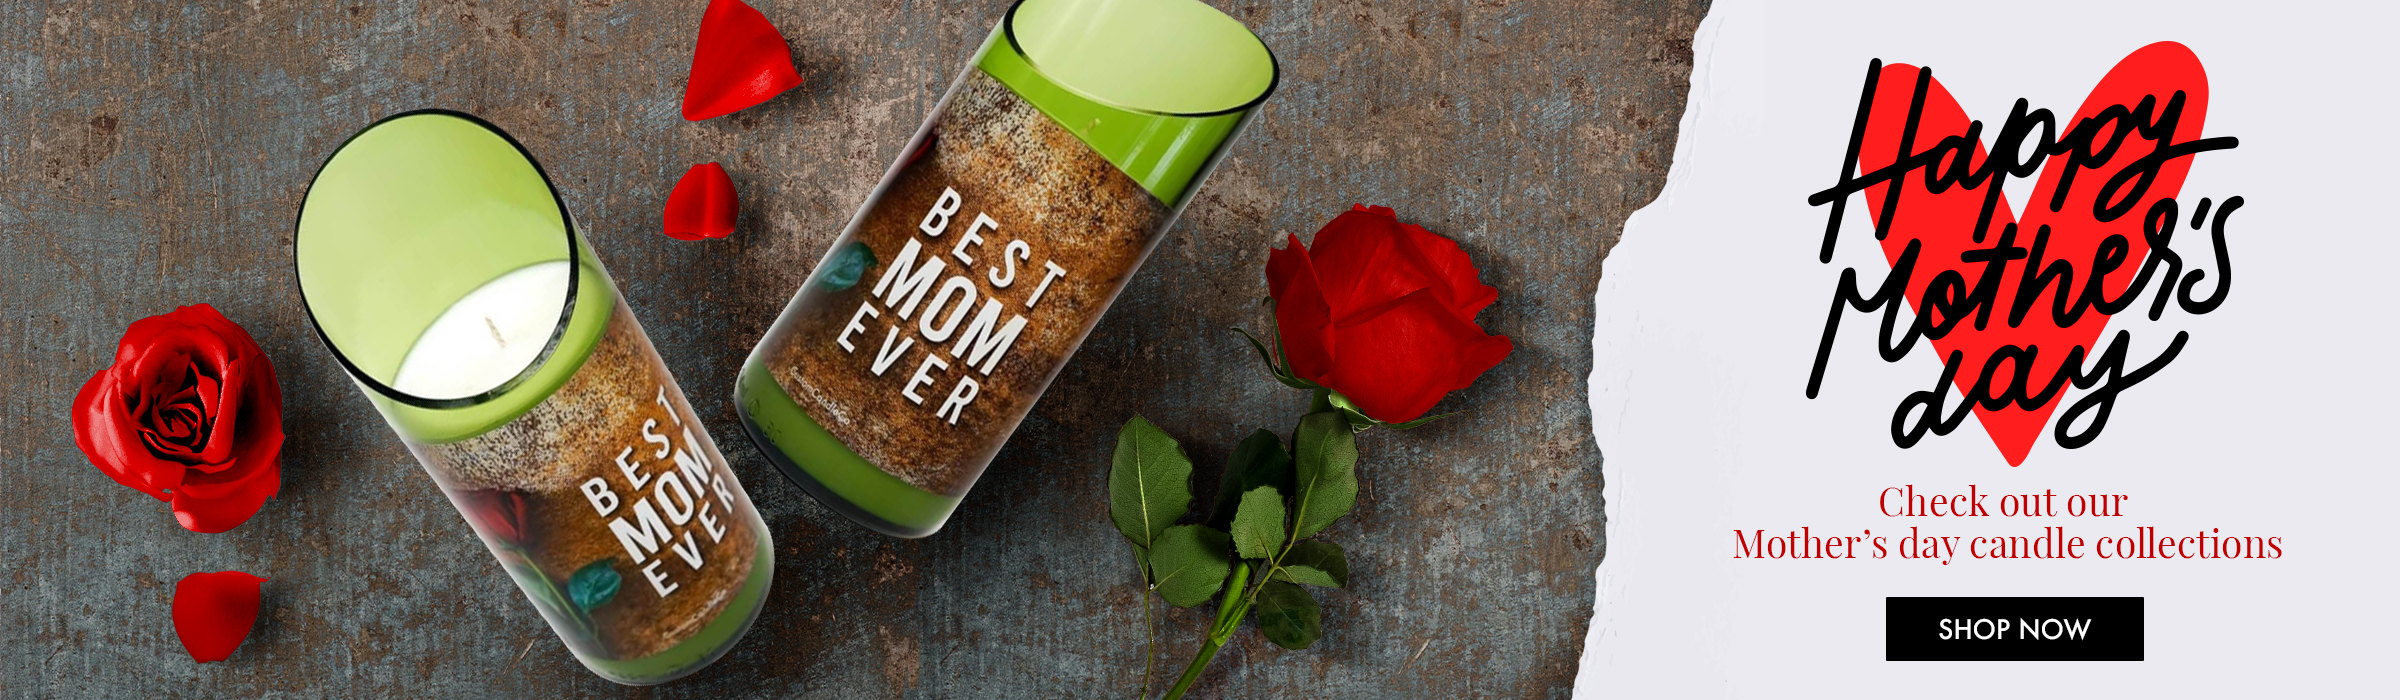 A Mother's Day banner ad with roses and a candle that says, "Best Mom Ever"